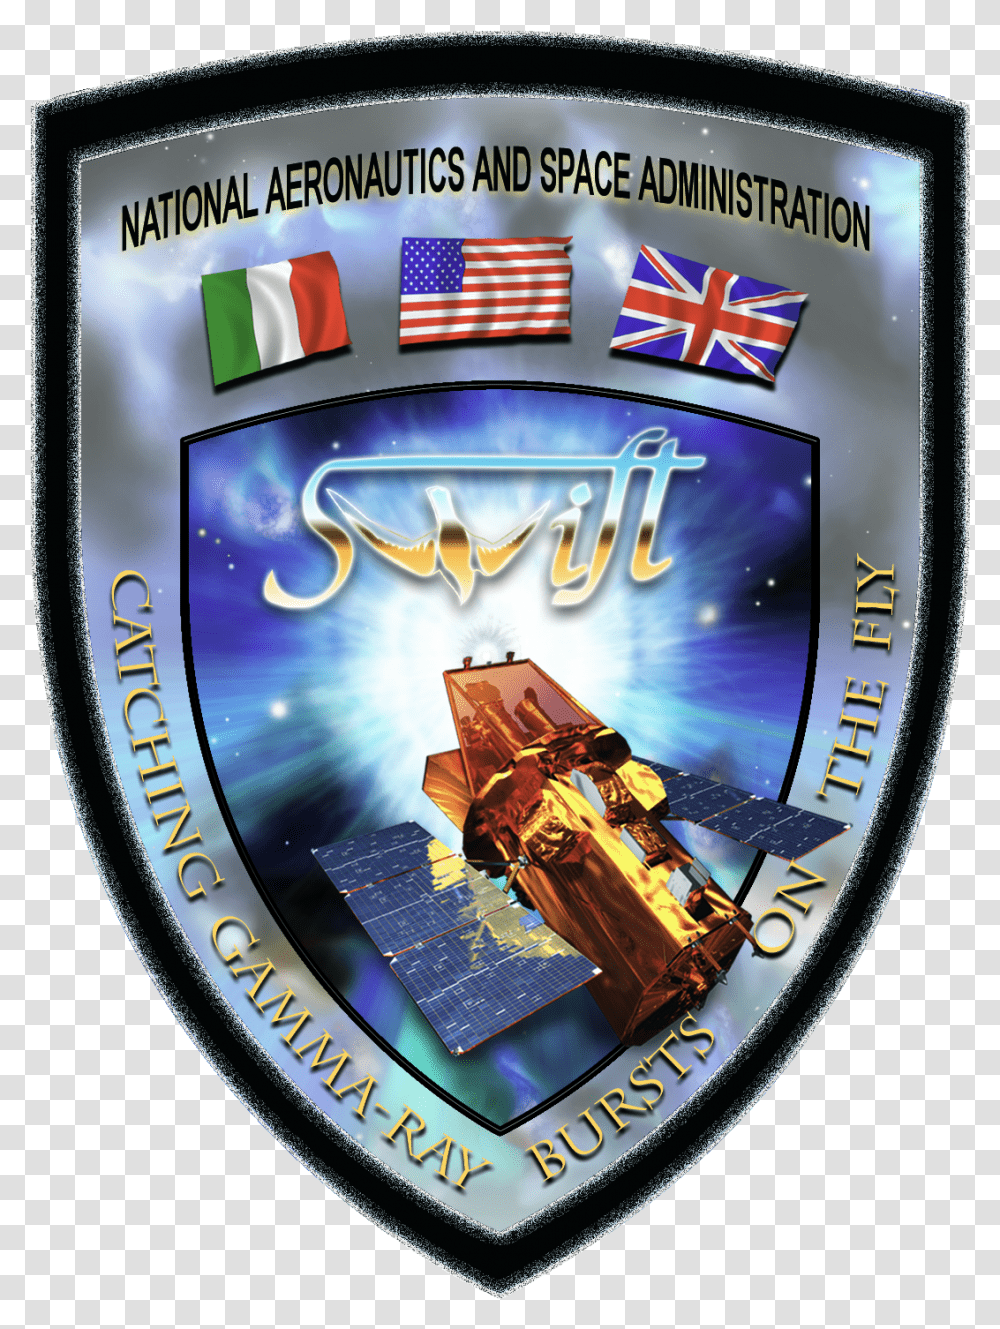 Swift Gamma Ray Burst Mission Patch Nasa Logo Mission Patch, Disk, Dvd Transparent Png